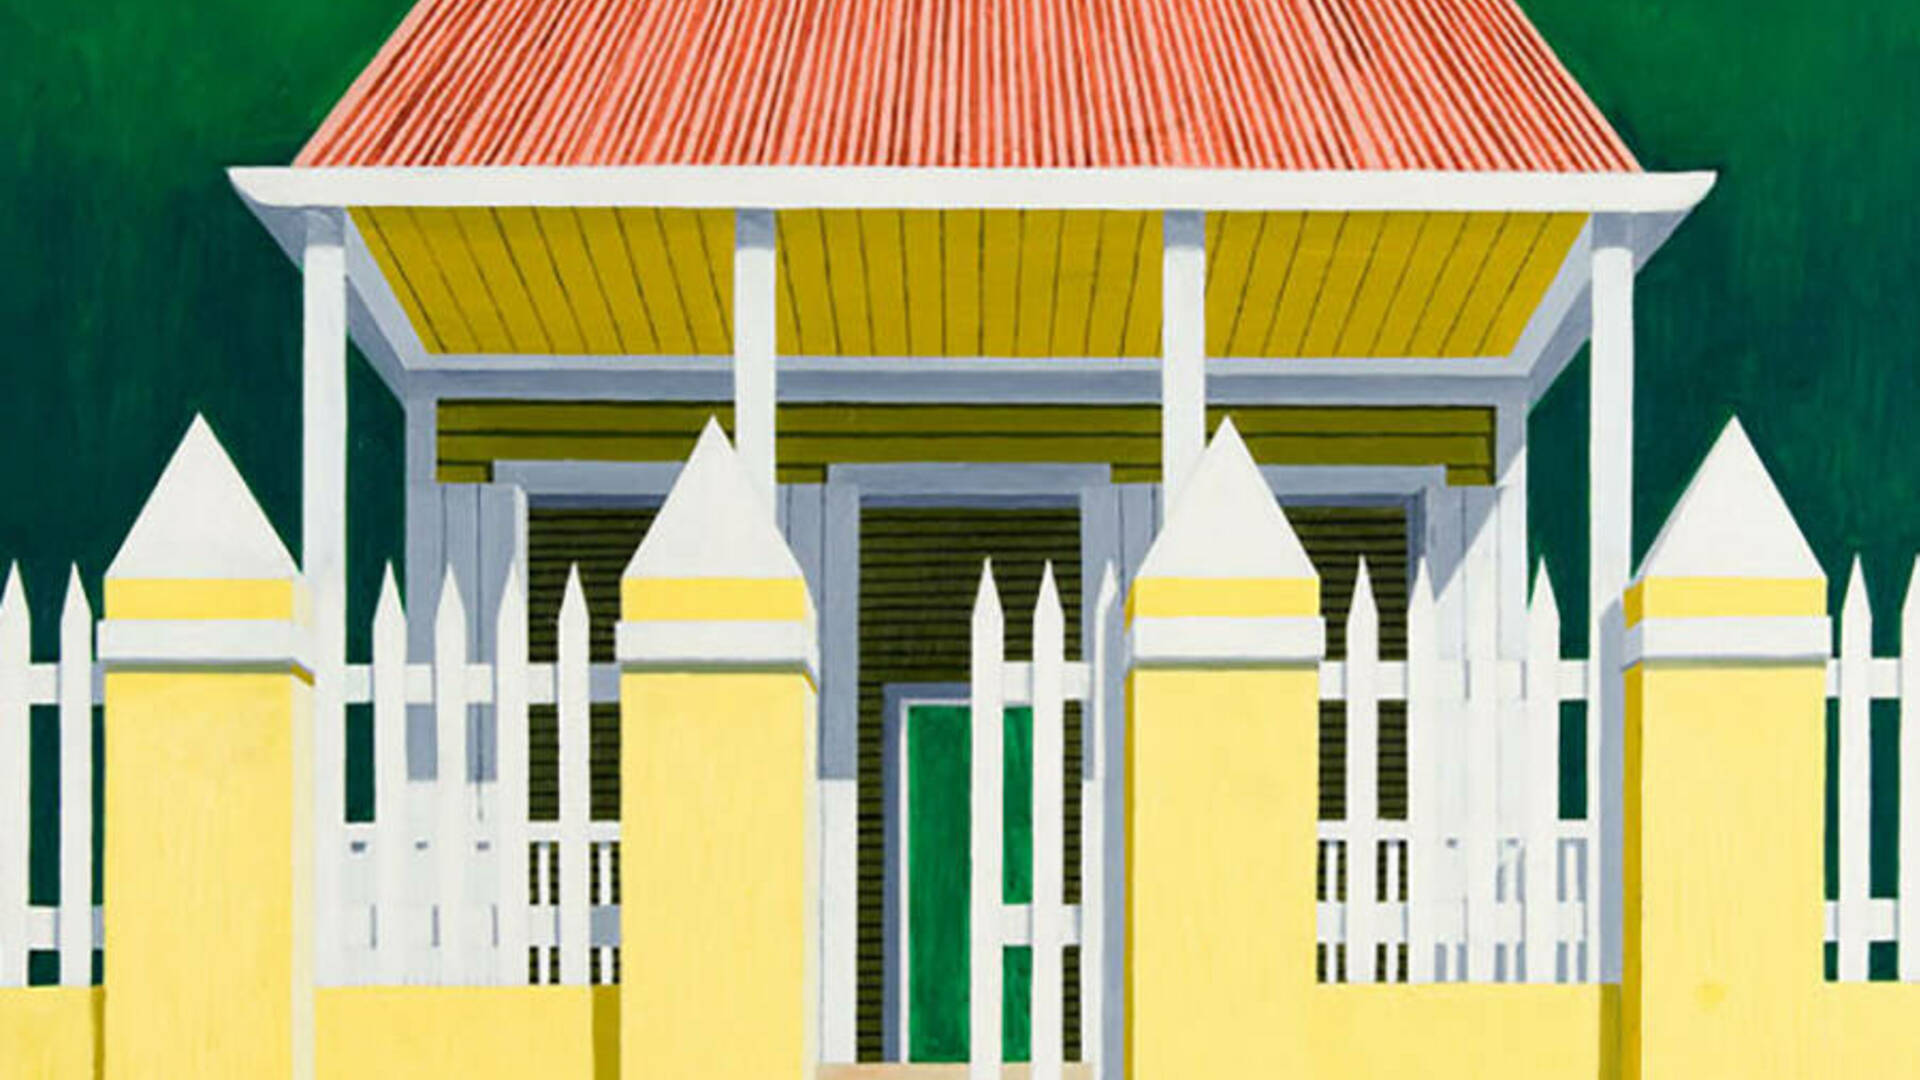 Emilio Sánchez (Cuban, 1921–1999), Untitled, House with Yellow Fence, ca. 1980s, oil on canvas. Gift of the Emilio Sánchez Foundation